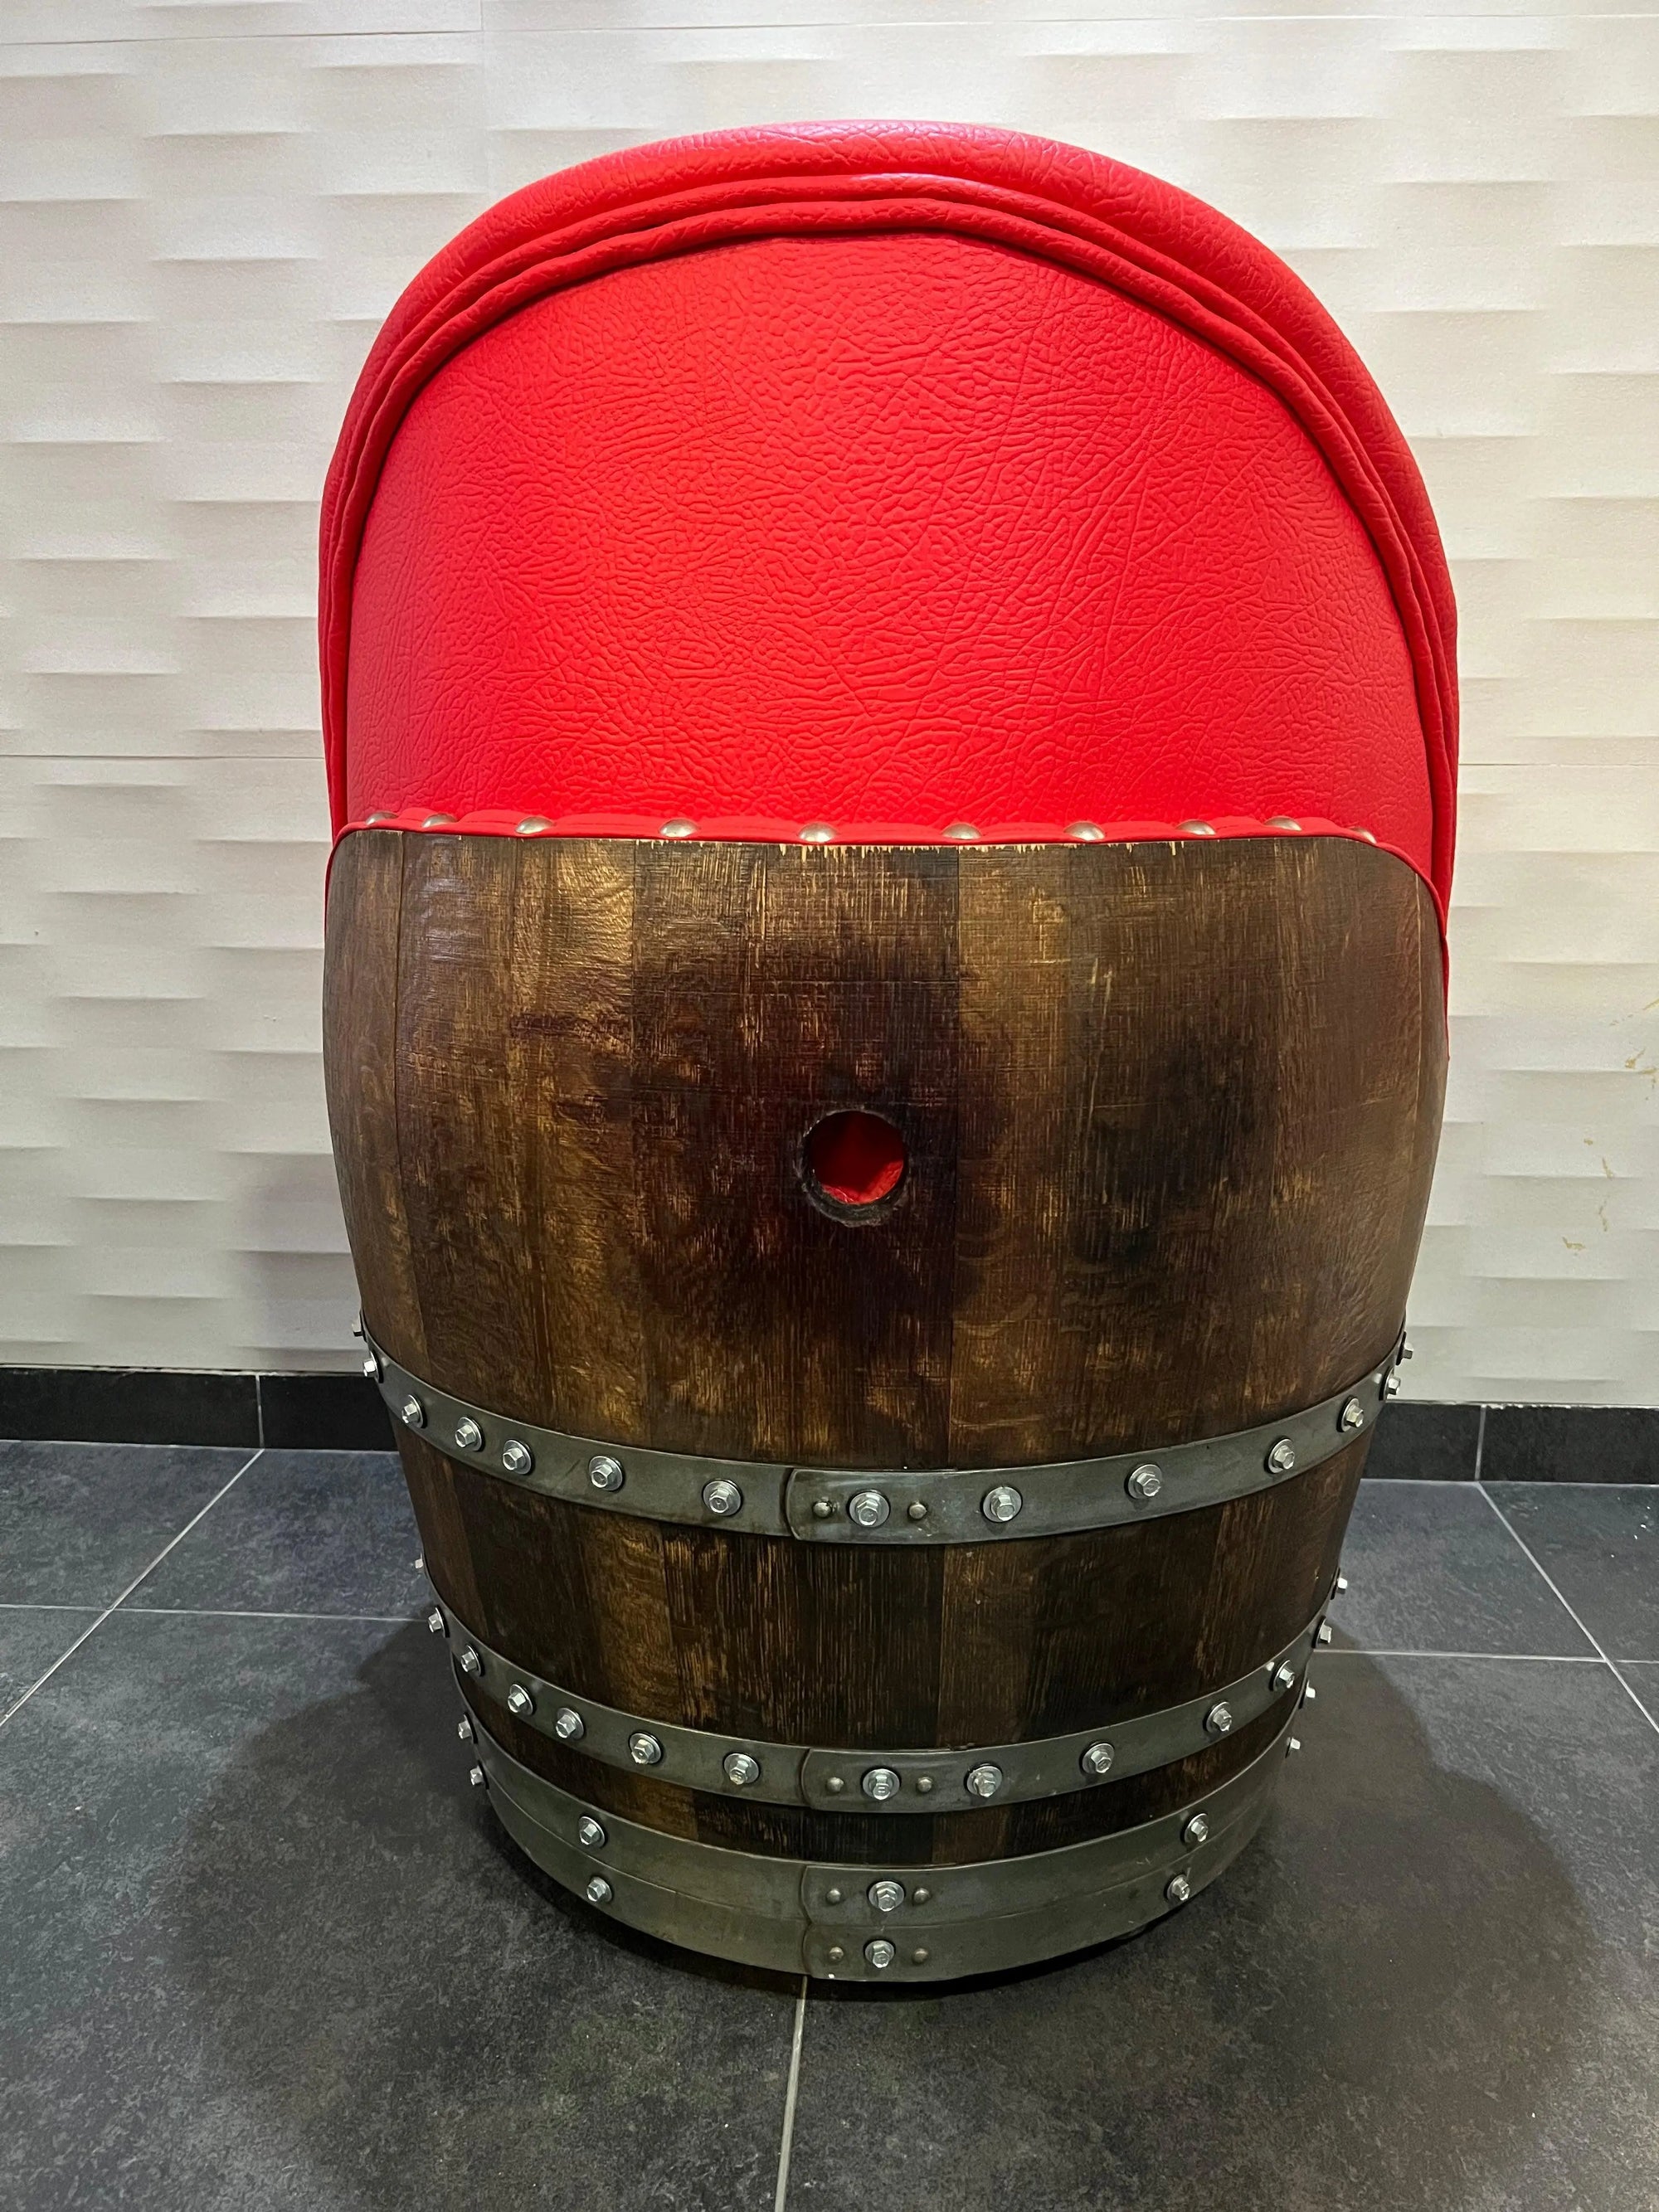 Wine Barrel Chair Red (Limited Colorway) - Oak Wood Wine Barrels. wine barrel coffee table barrel glass top wine barrel glass top whiskey barrel glass top bourbon barrel glass top barrel coffee table barrel wine rack wine barrel table whiskey barrel whiskey barrel table wine barrel handma